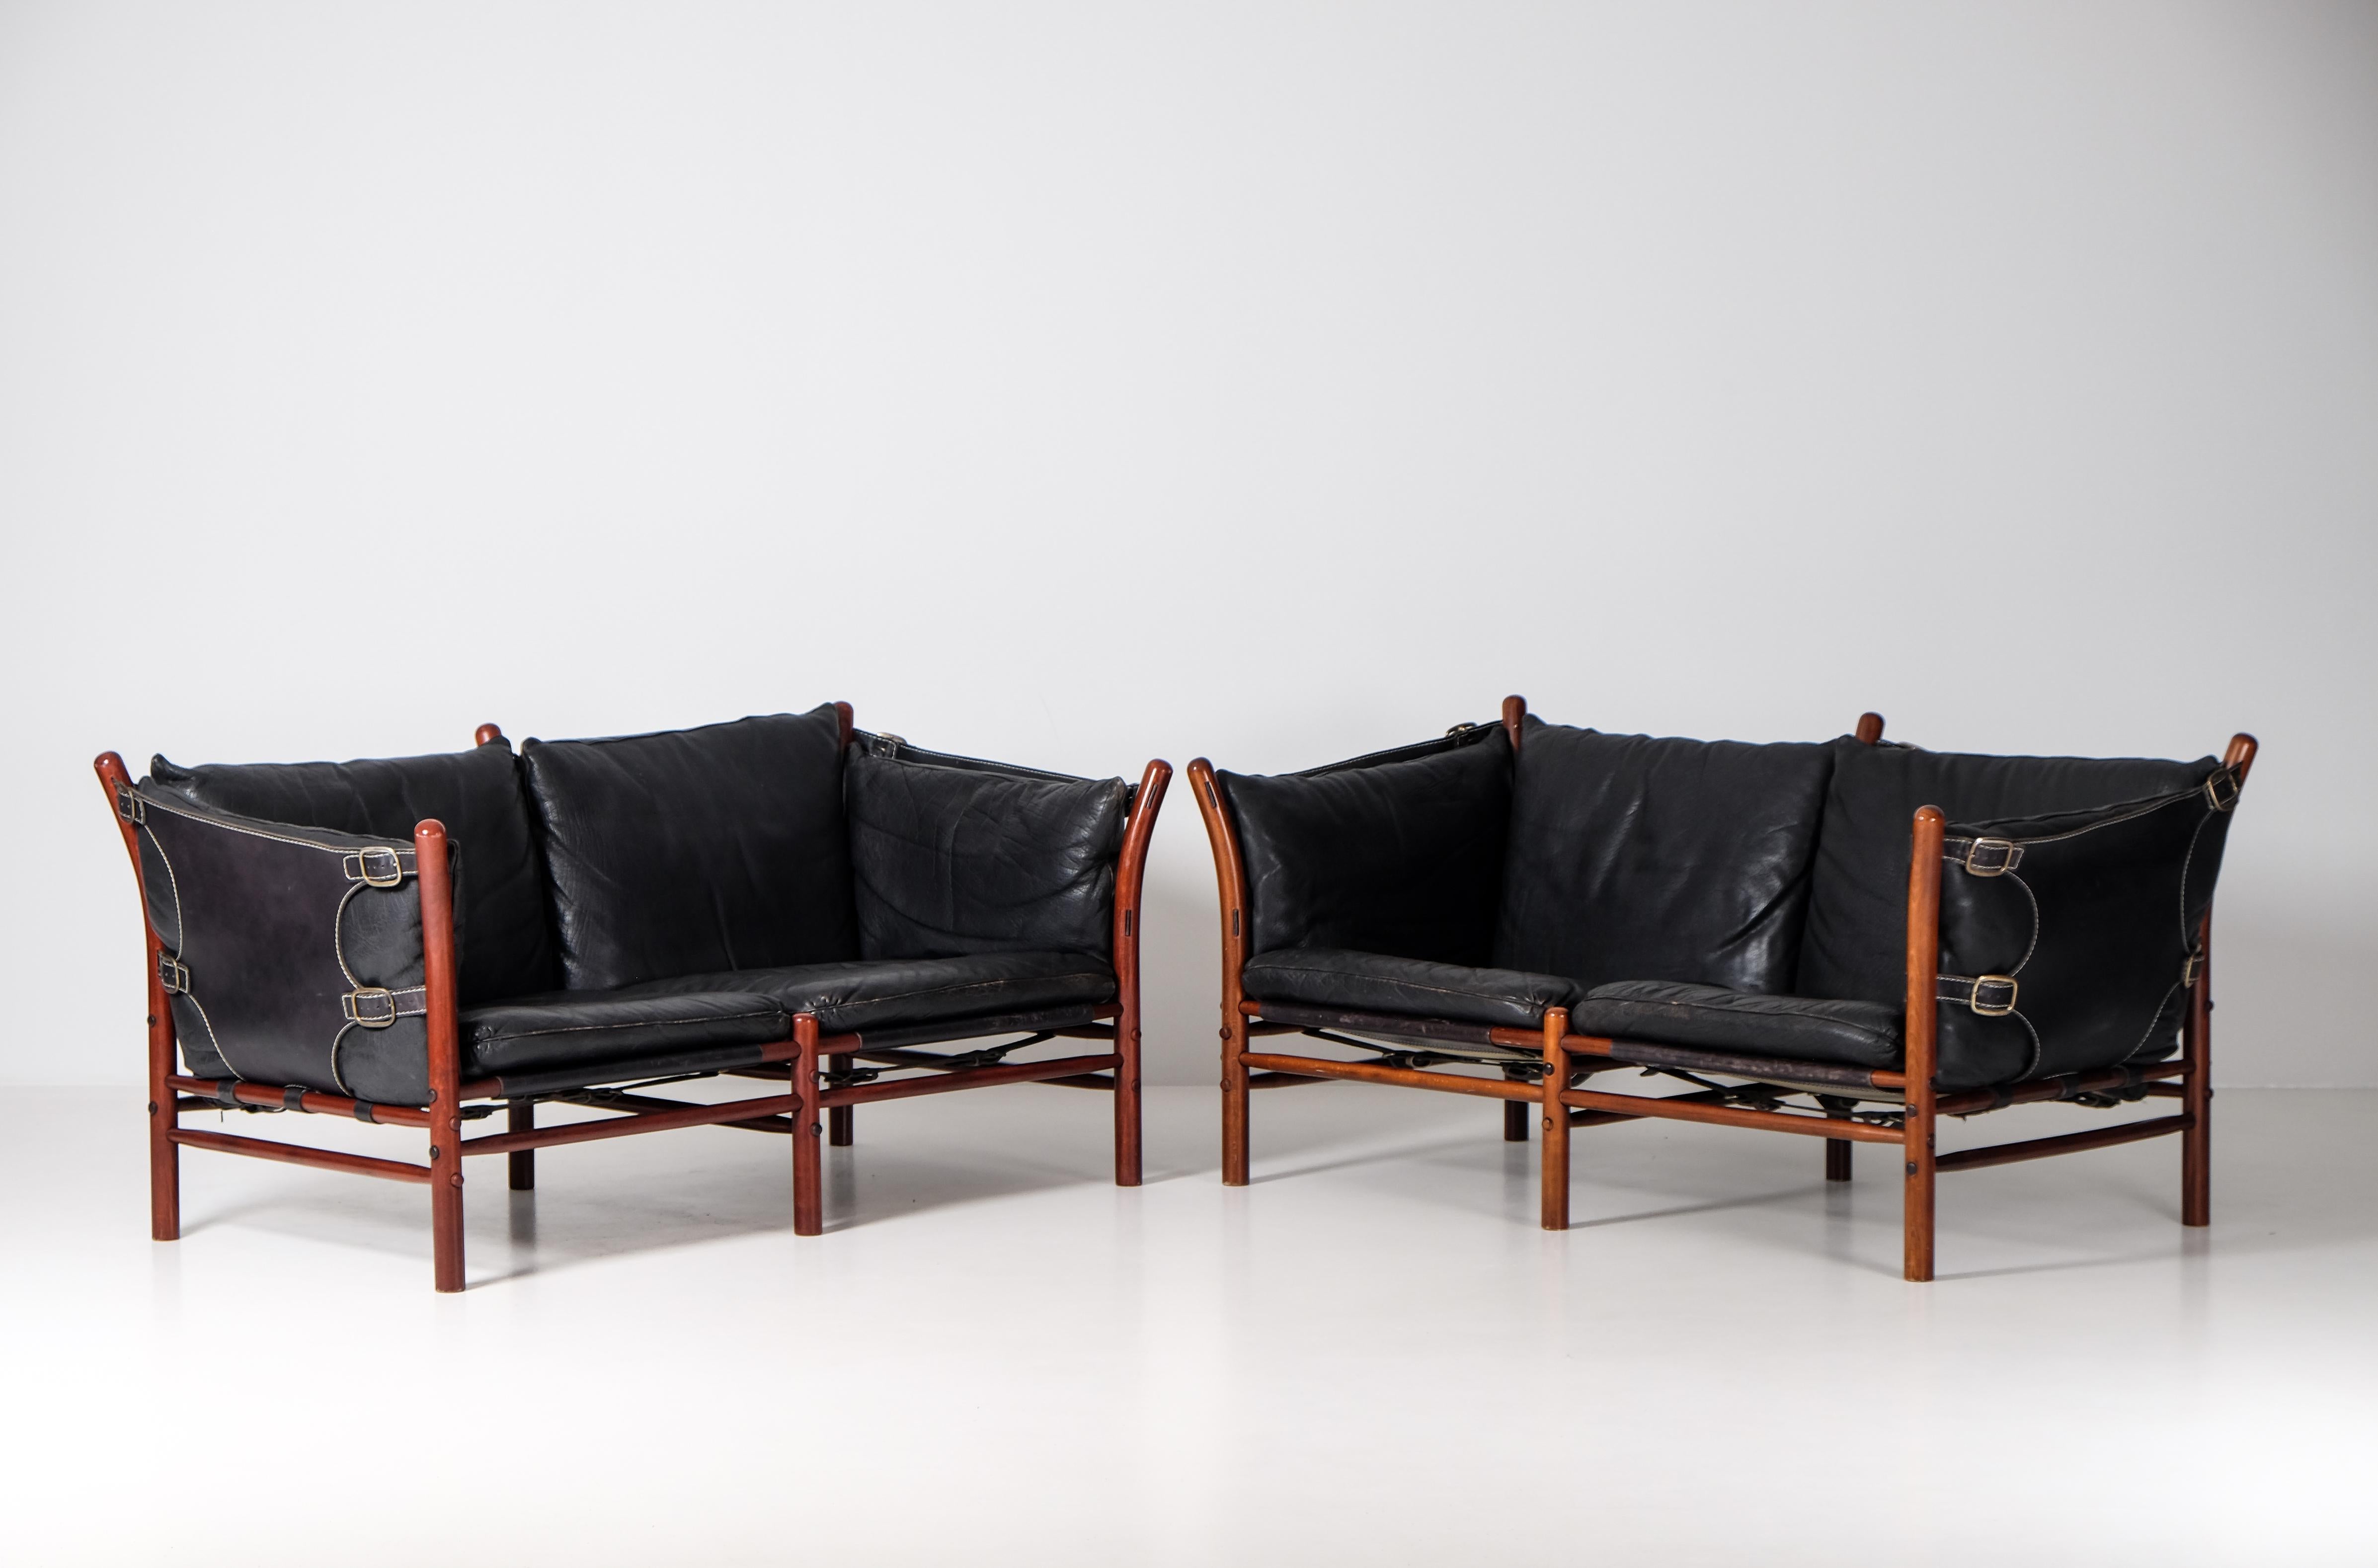 Pair of ilona sofas designed by Arne Norell 1960s, produced by Norell Möbel AB, Sweden.
Dark stained beech, original black leather and brass details.
Please note: Listed price is for (1) one sofa.
Global front door shipping, delivery within 14